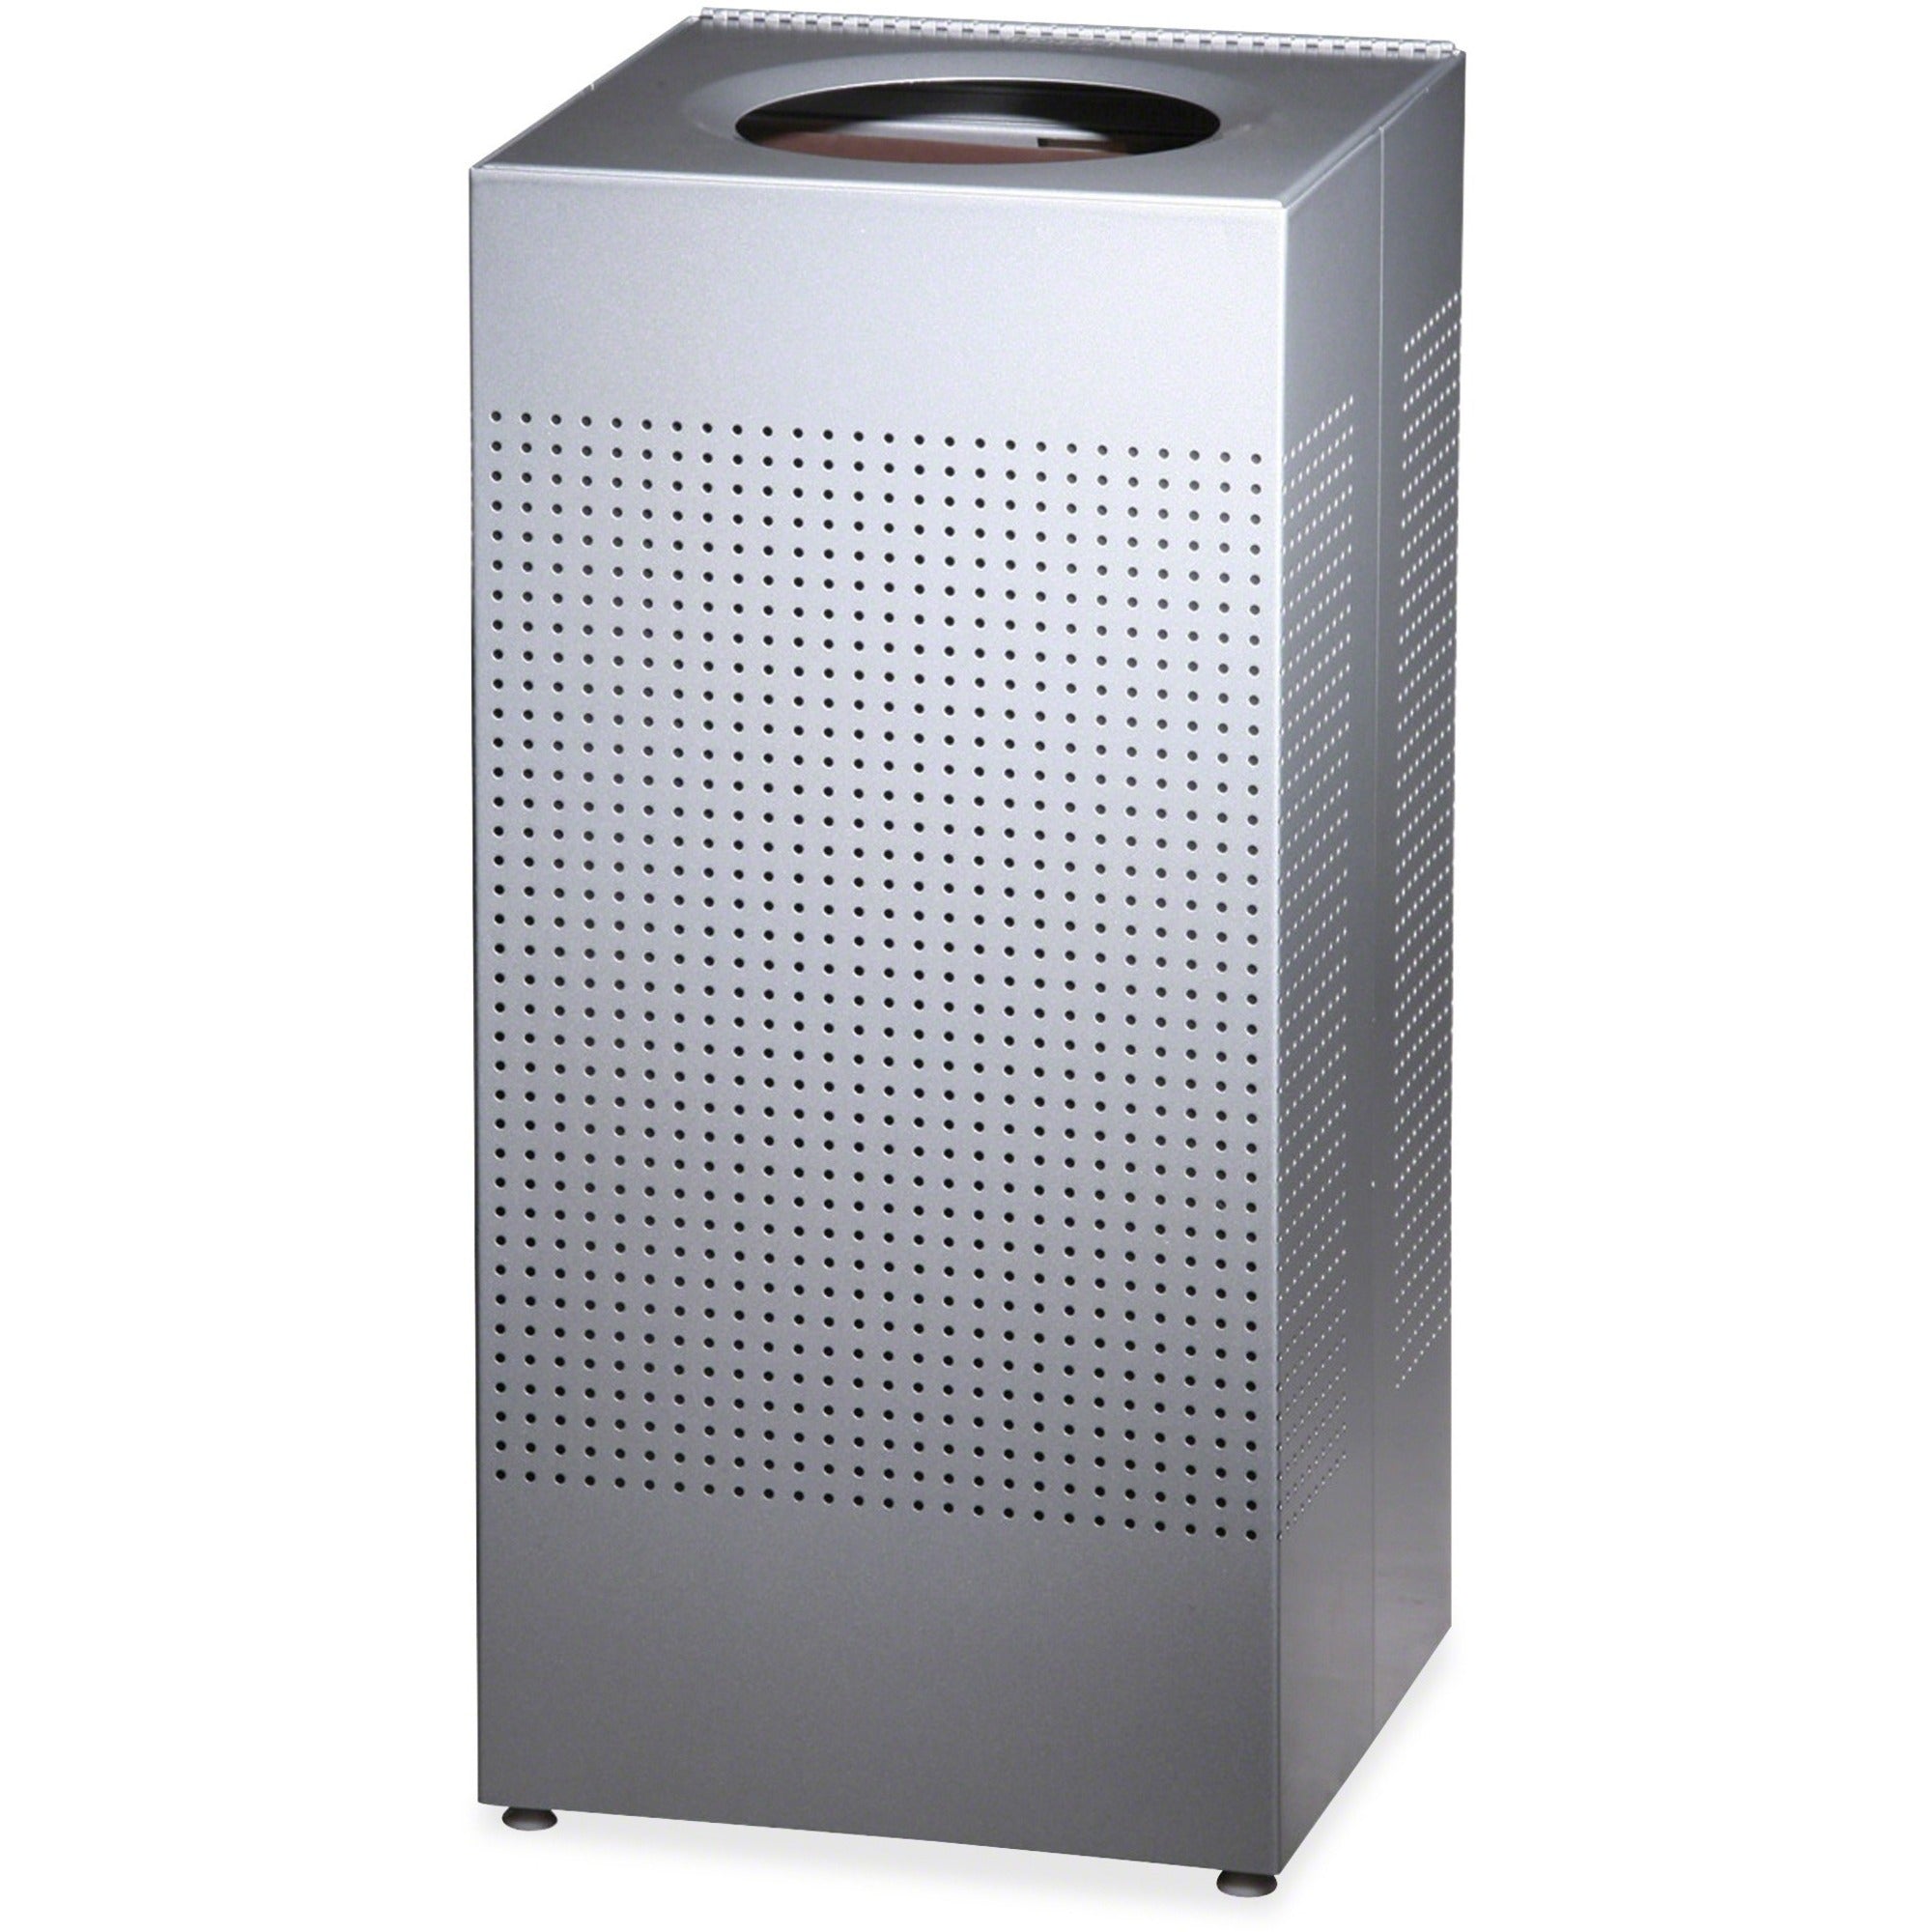 Rubbermaid Commercial Silhouettes 16G Waste Container - 16 gal Capacity - Square - Perforated, Fire-Safe, Durable - 30.4" Height x 14.8" Width x 14.8" Depth - Steel, Metal - Silver Metallic - 1 Each - 